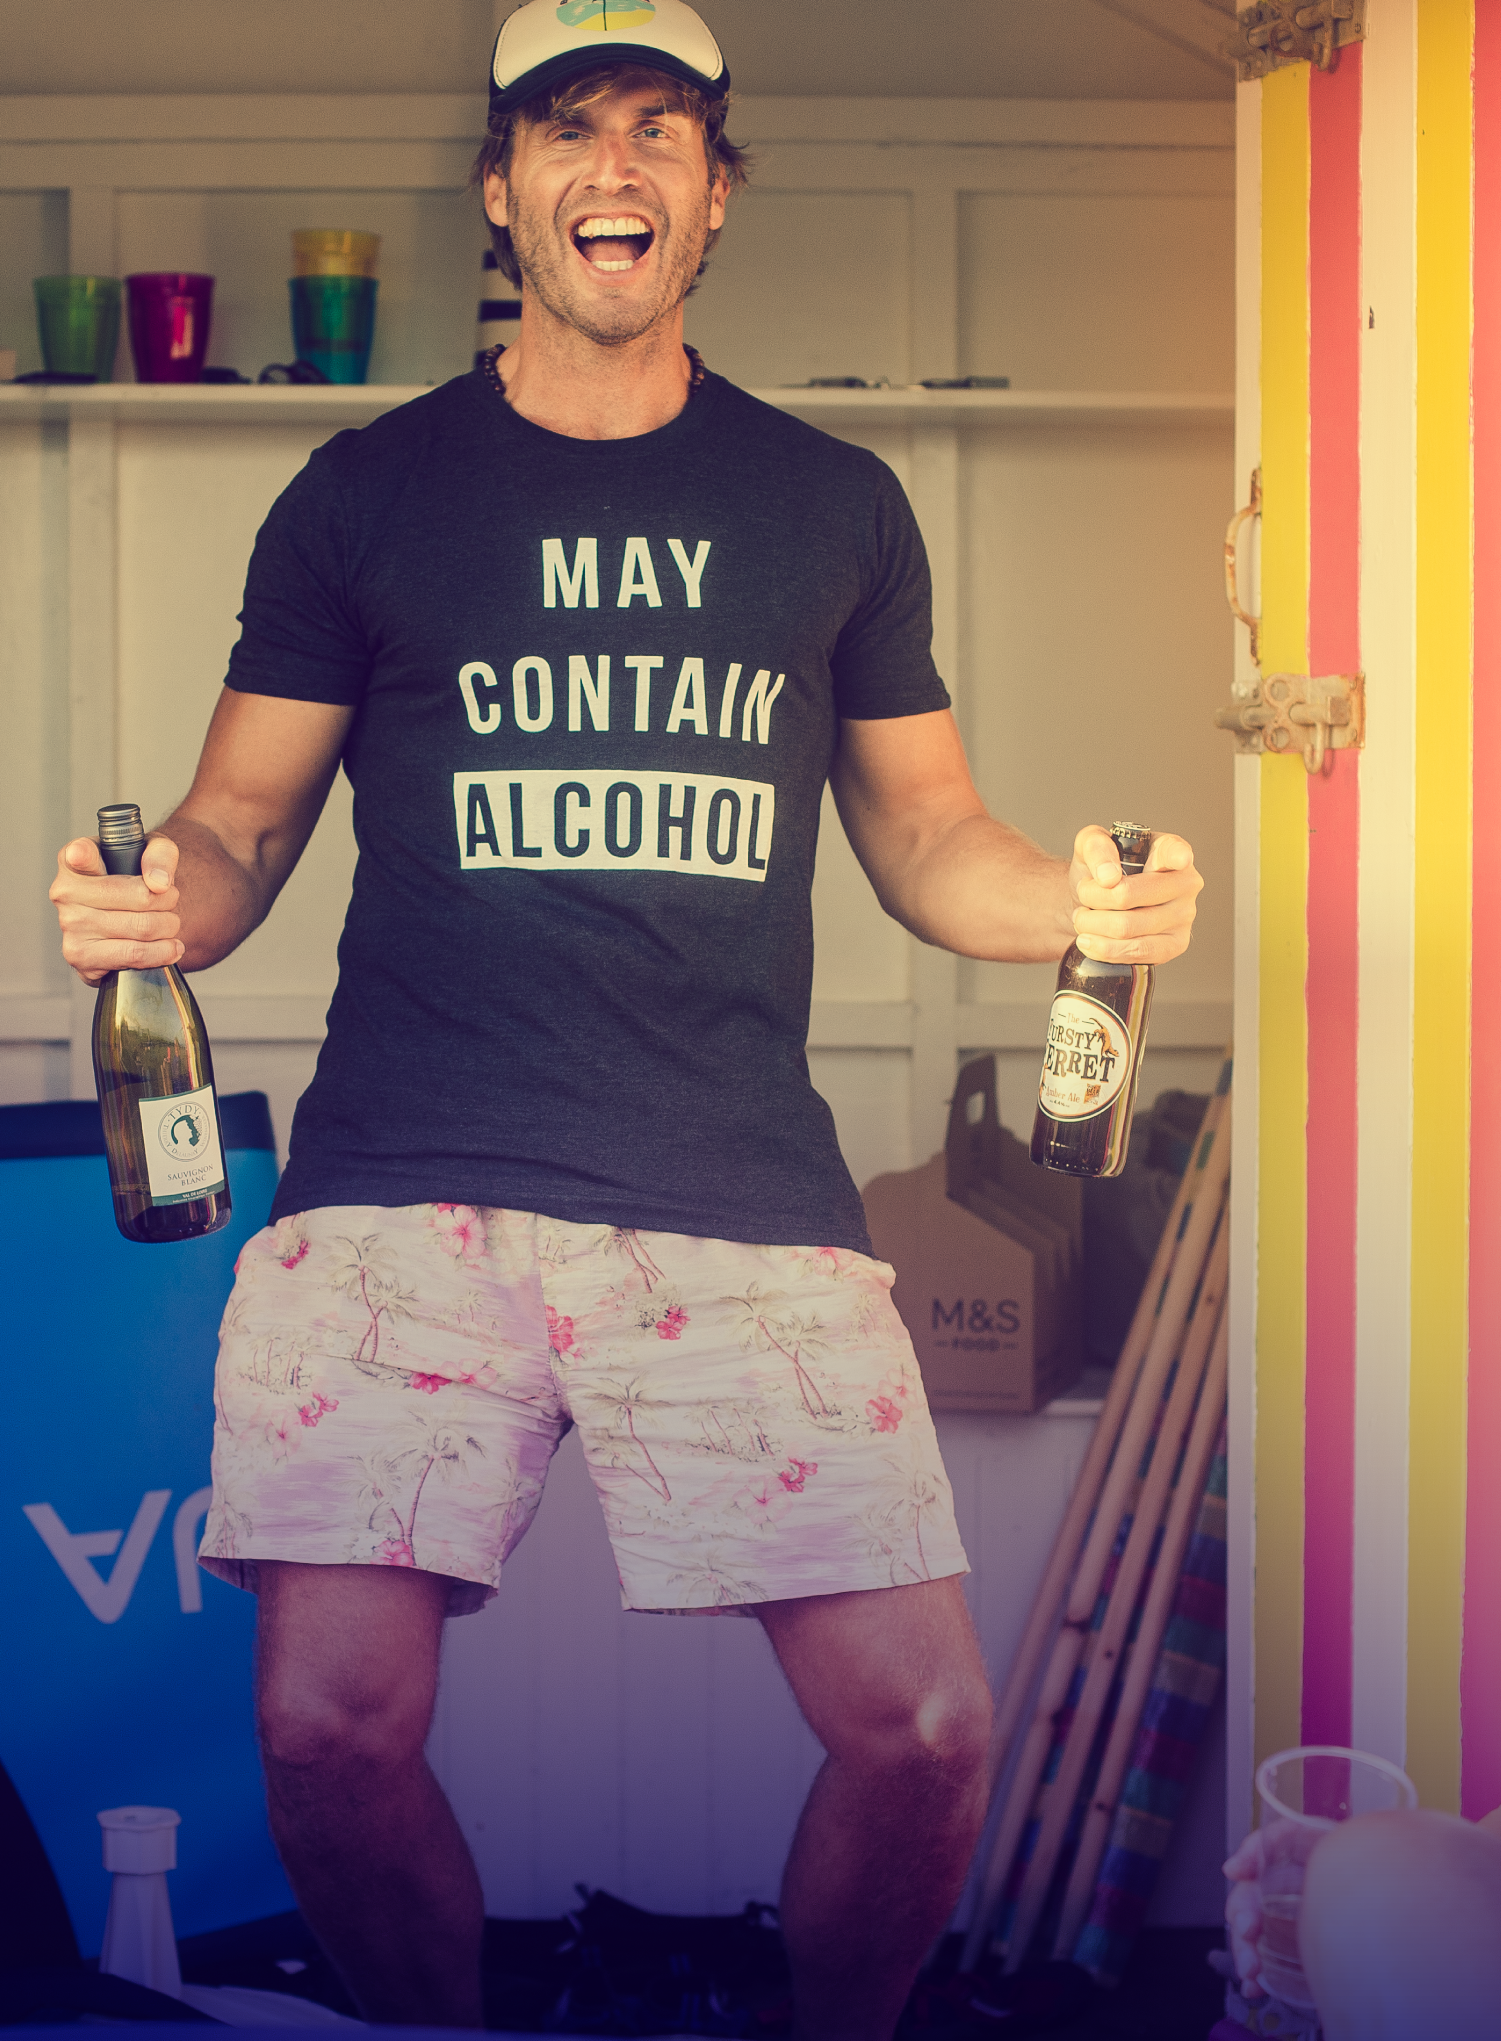 Man with a hat, olding a beer bottle and a champagne bottle, wearing a may contain alcohol, printed shirt